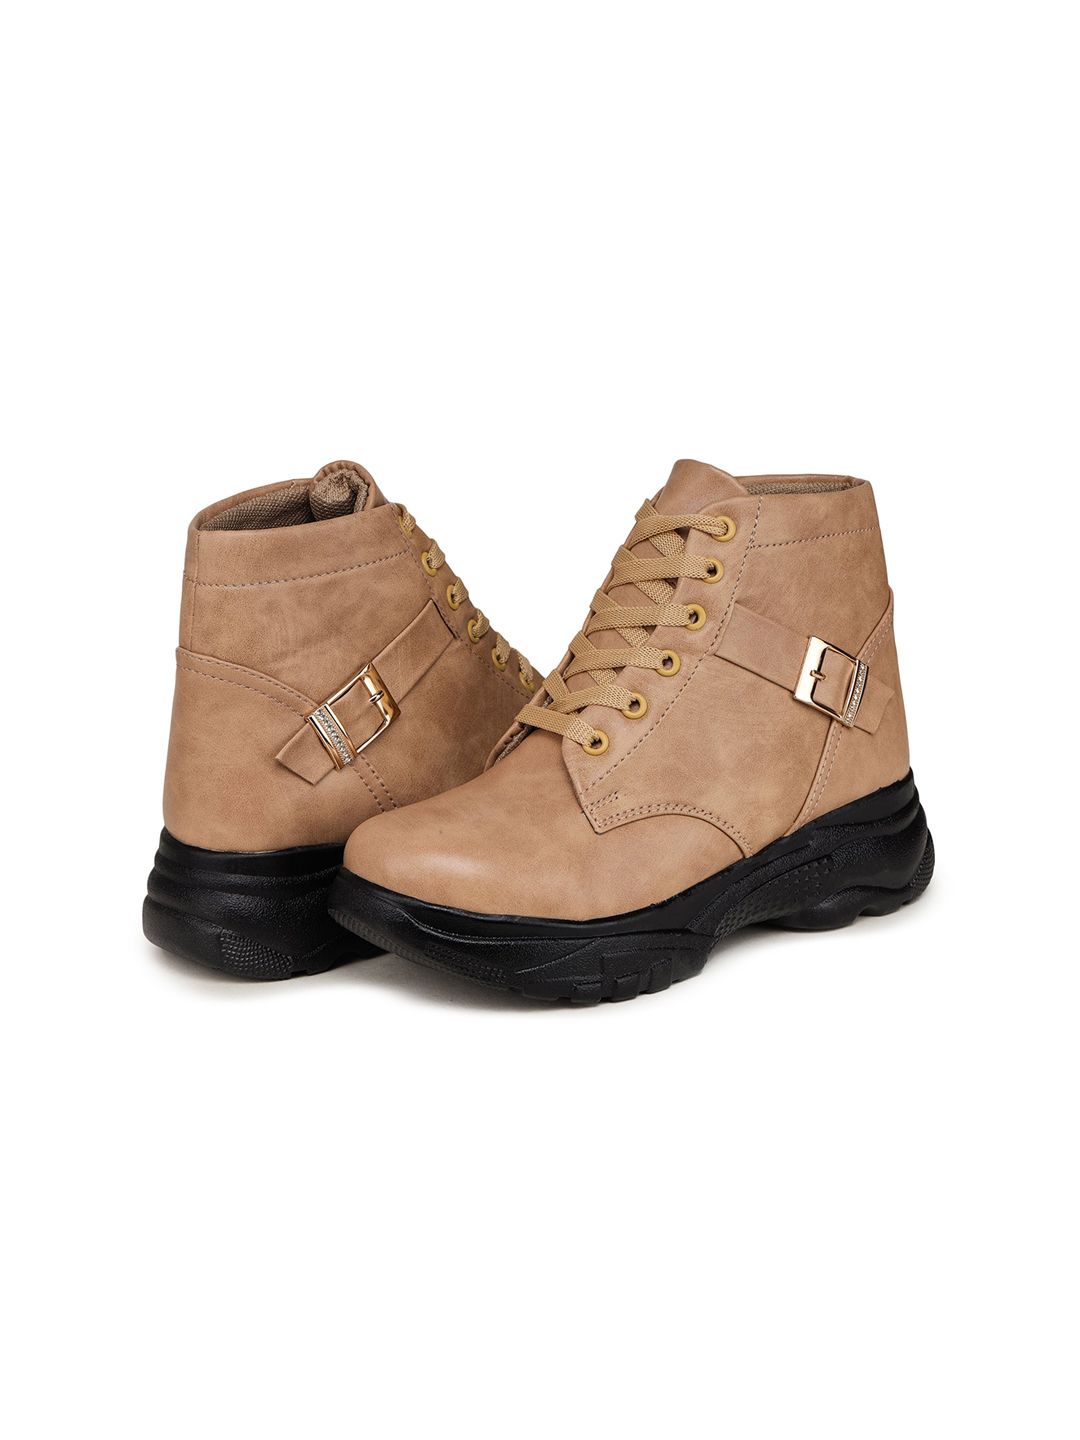 BOOTCO Women Beige & Black Solid Boot Price in India